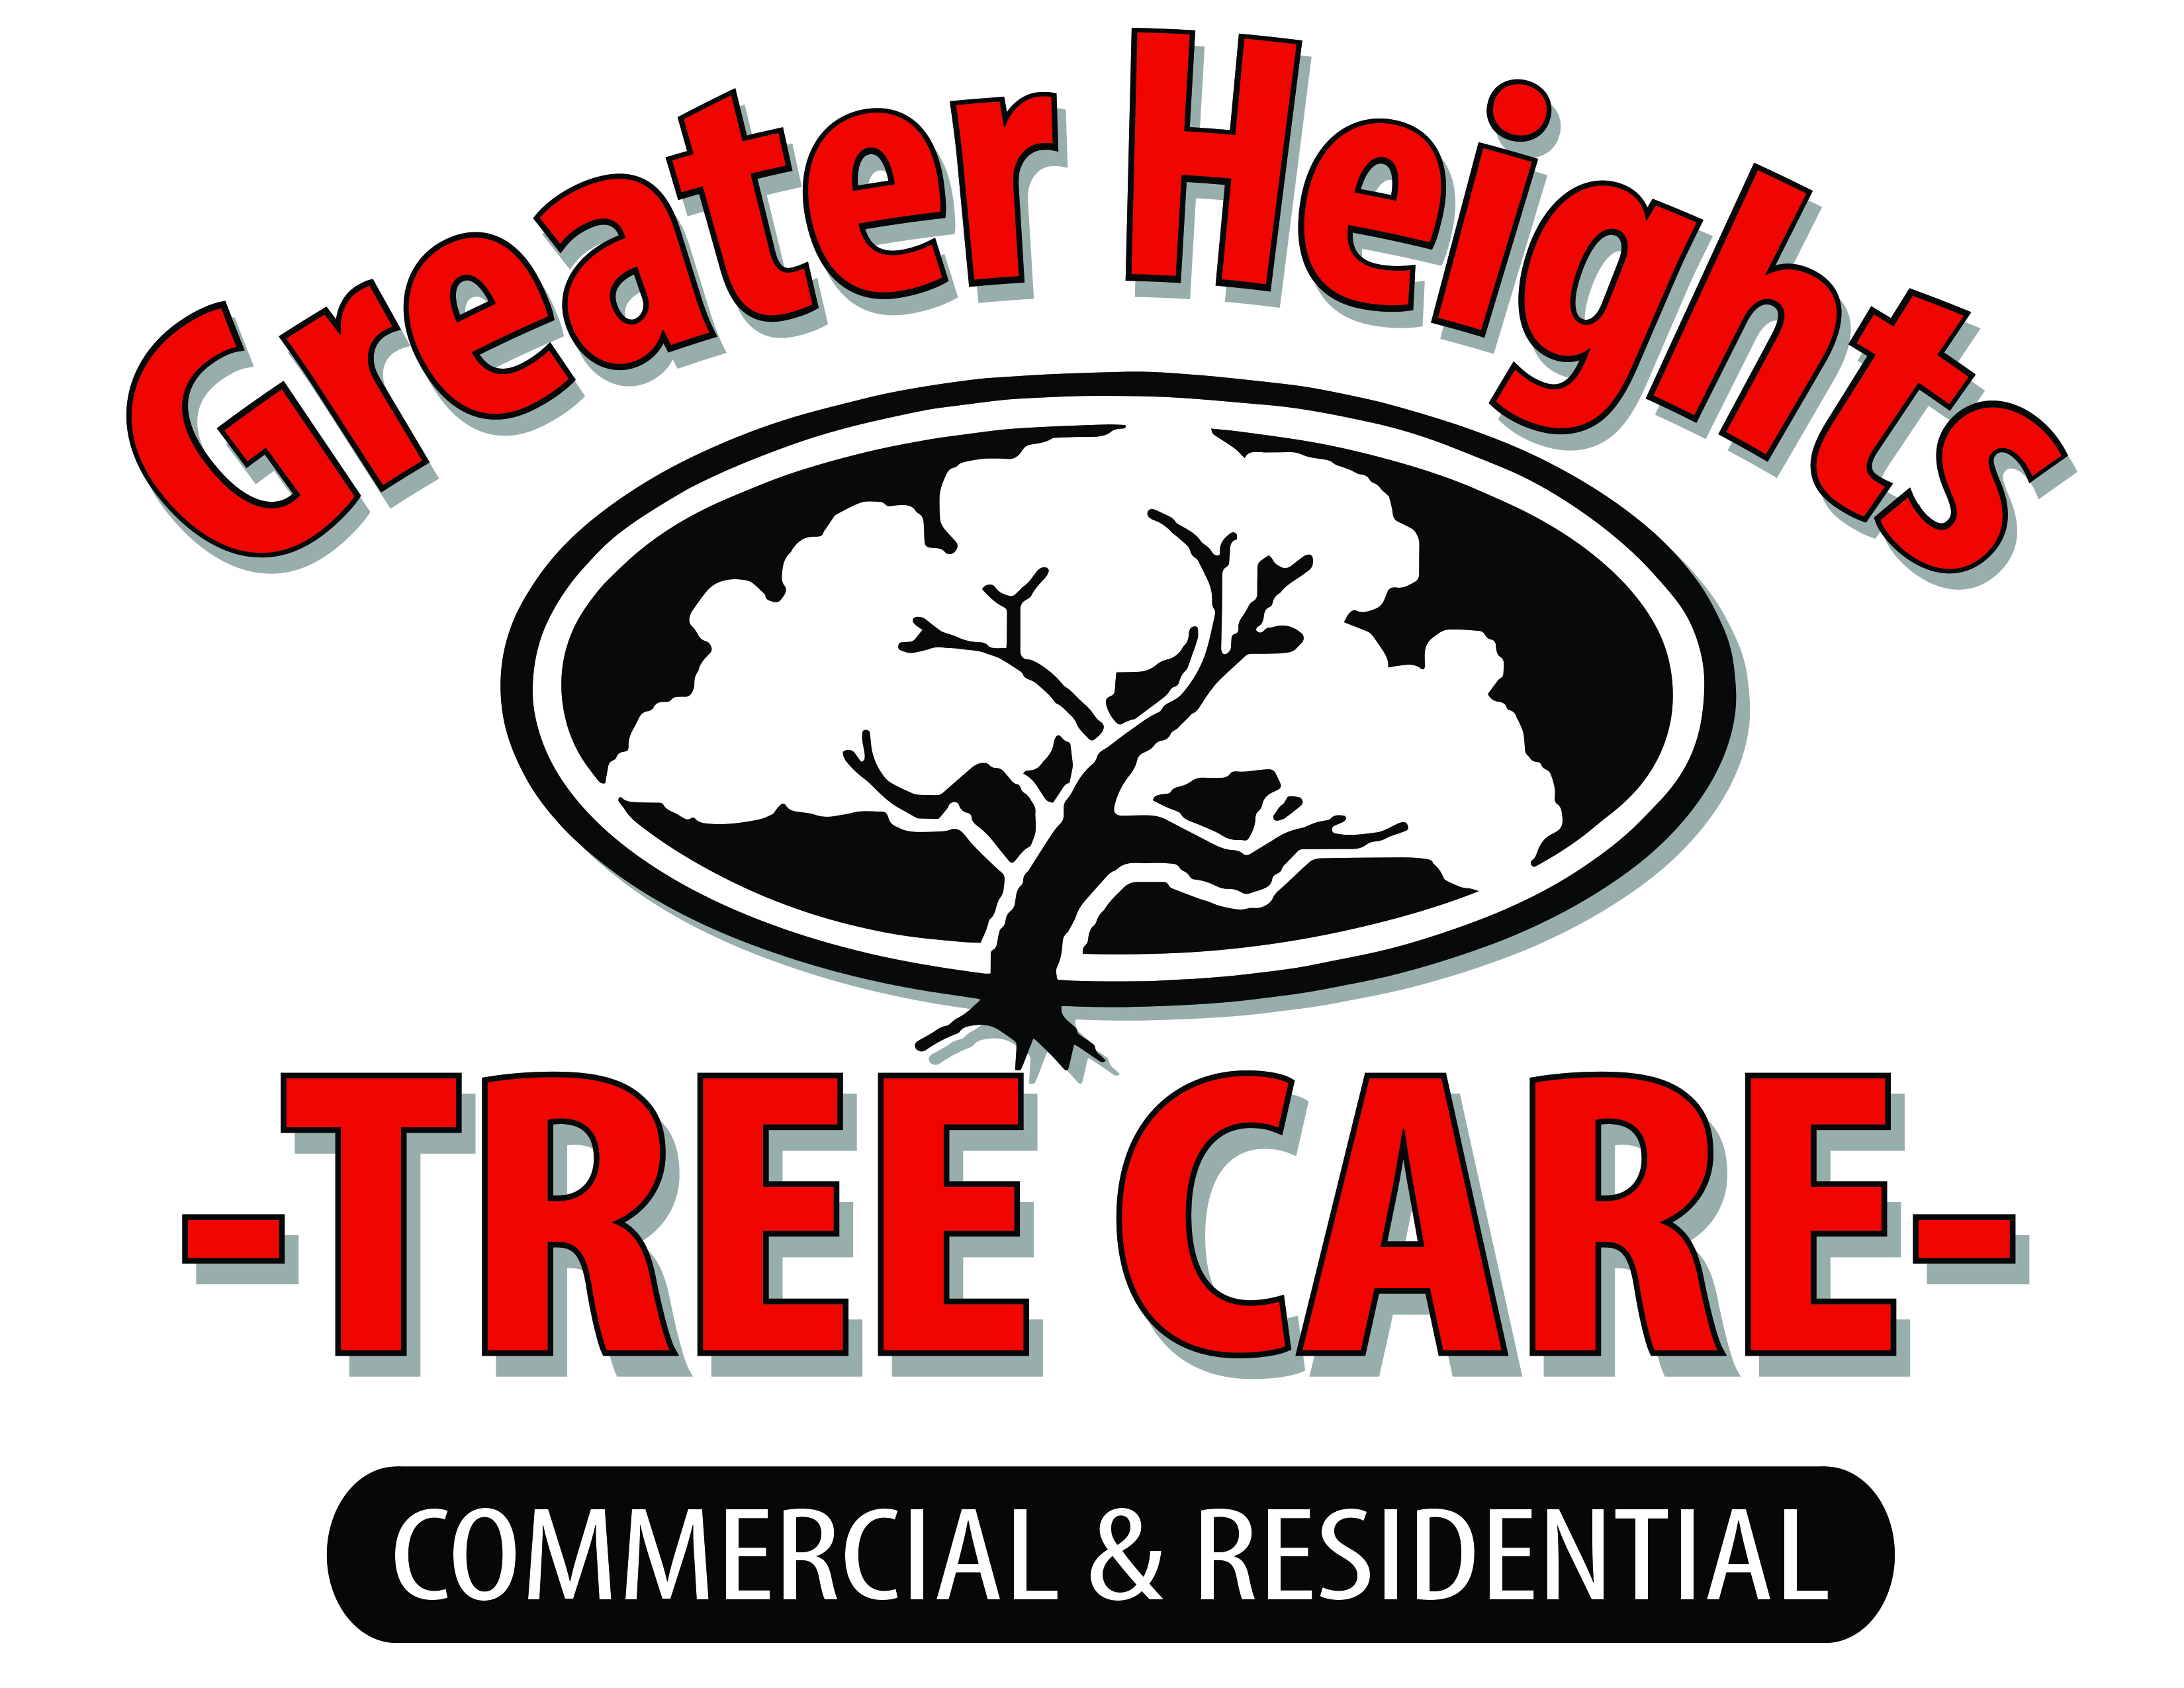 Greater Heights Tree Care LOGO